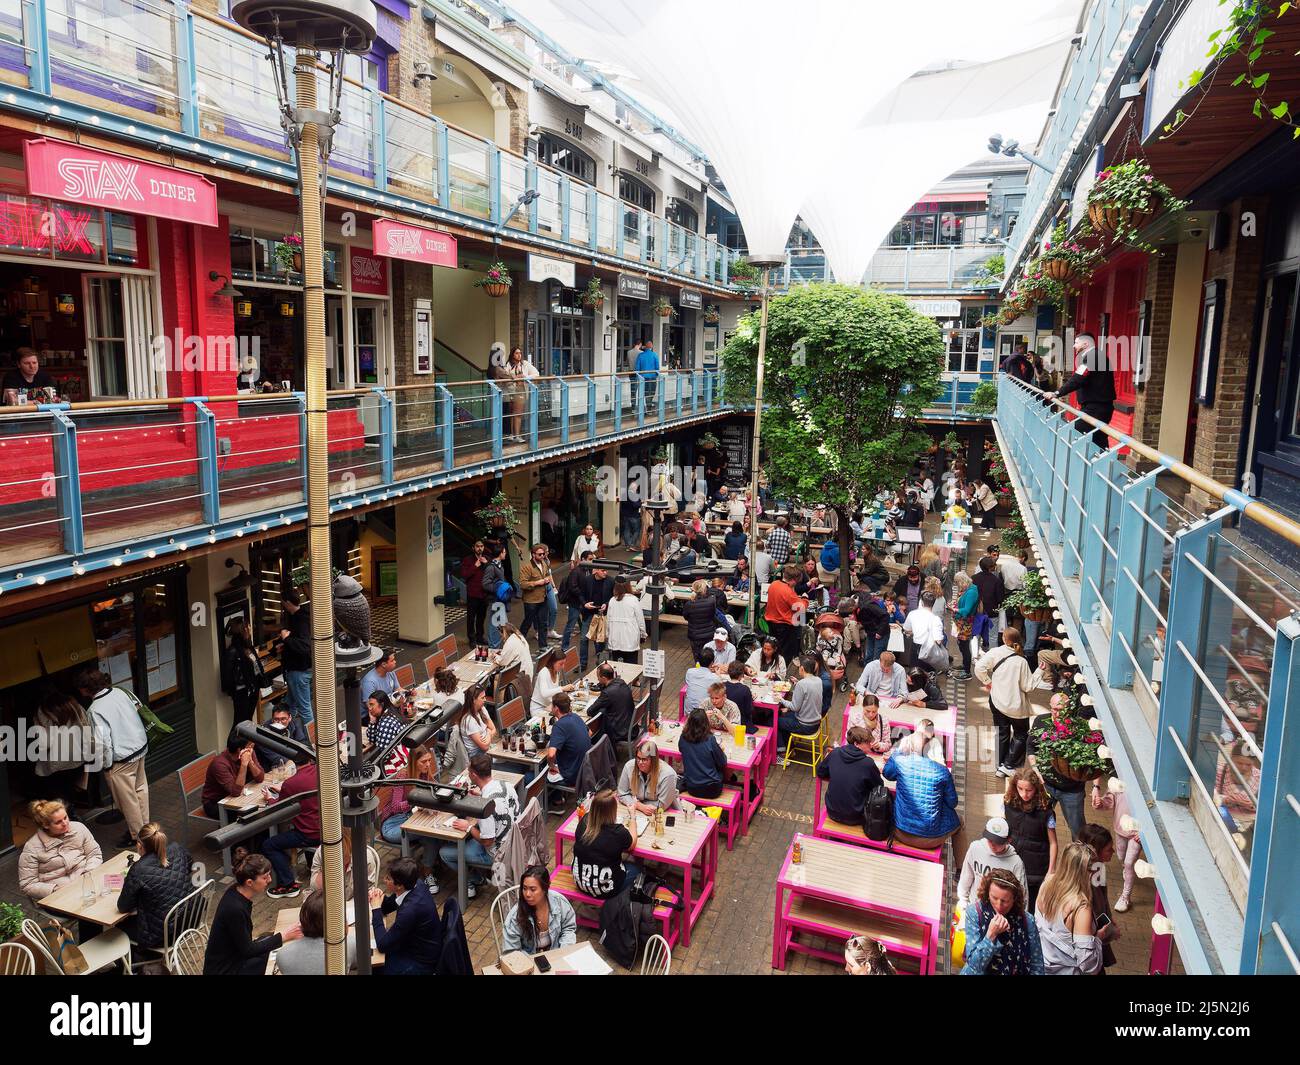 A view of people dining and enjoying food and drink in Kingly Court just off Carnaby Street in London UK Stock Photo